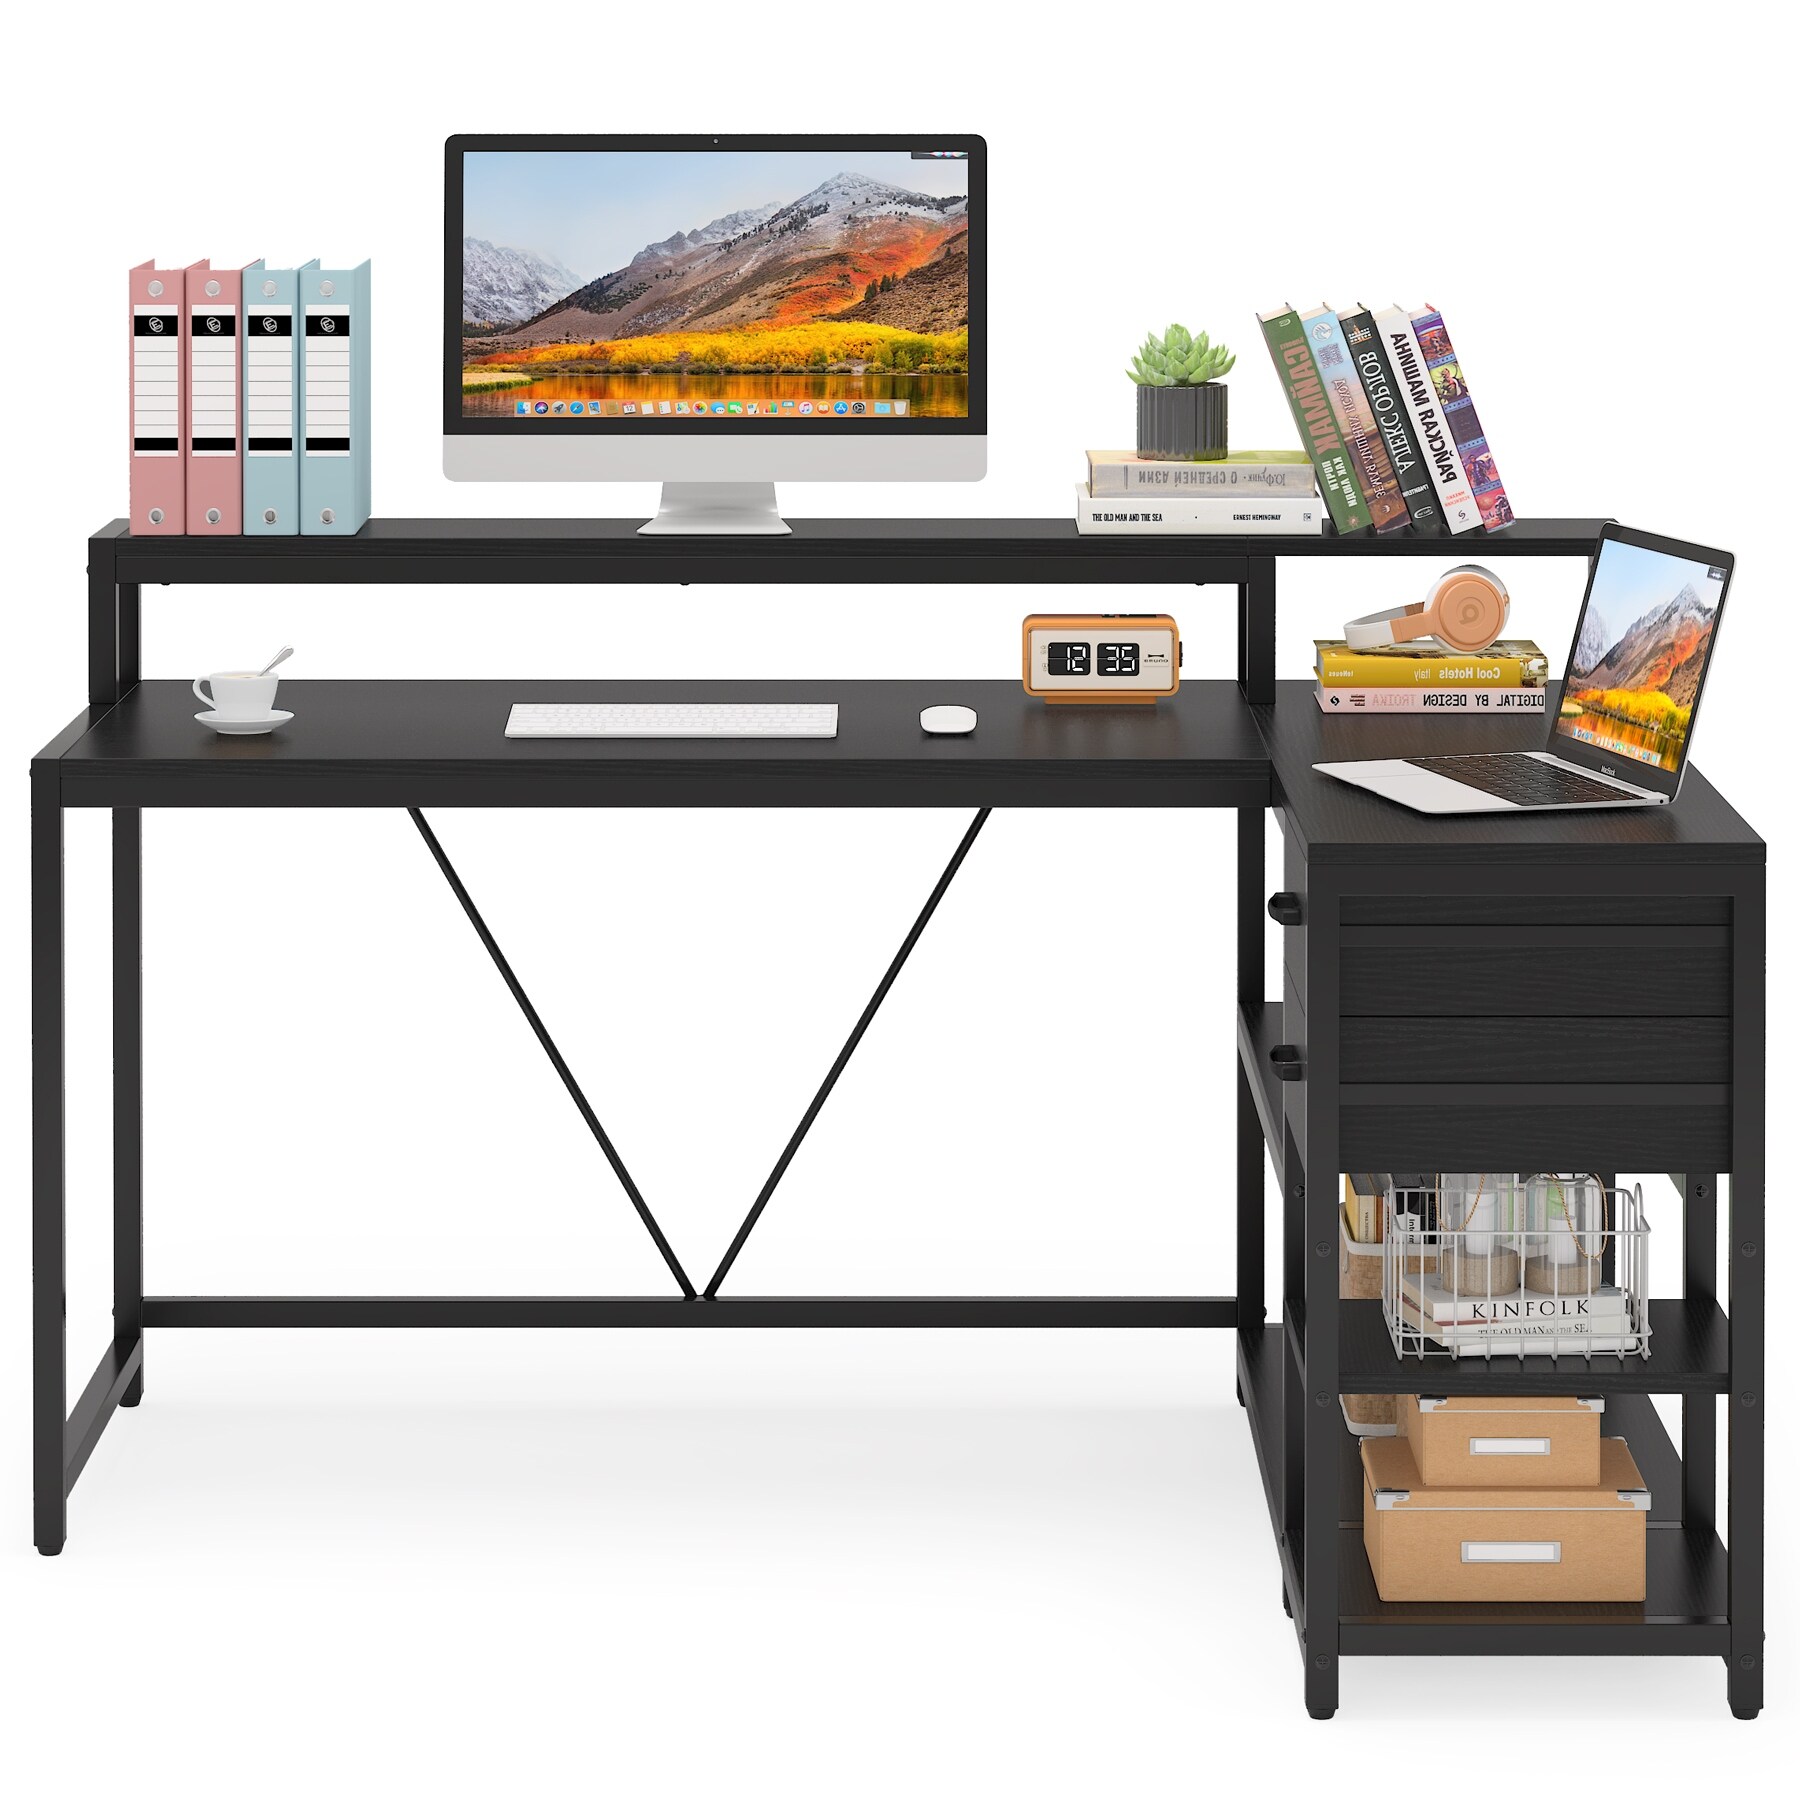 https://ak1.ostkcdn.com/images/products/is/images/direct/3b0b6714cbc5ae5abf026c71f770c6ed490ba10d/L-Shaped-Desk-with-Drawer%2C-Home-Office-Corner-Desk-with-Storage-Shelves-and-Monitor-Stand%2C-Rustic-PC-Desk-for-Small-Space.jpg